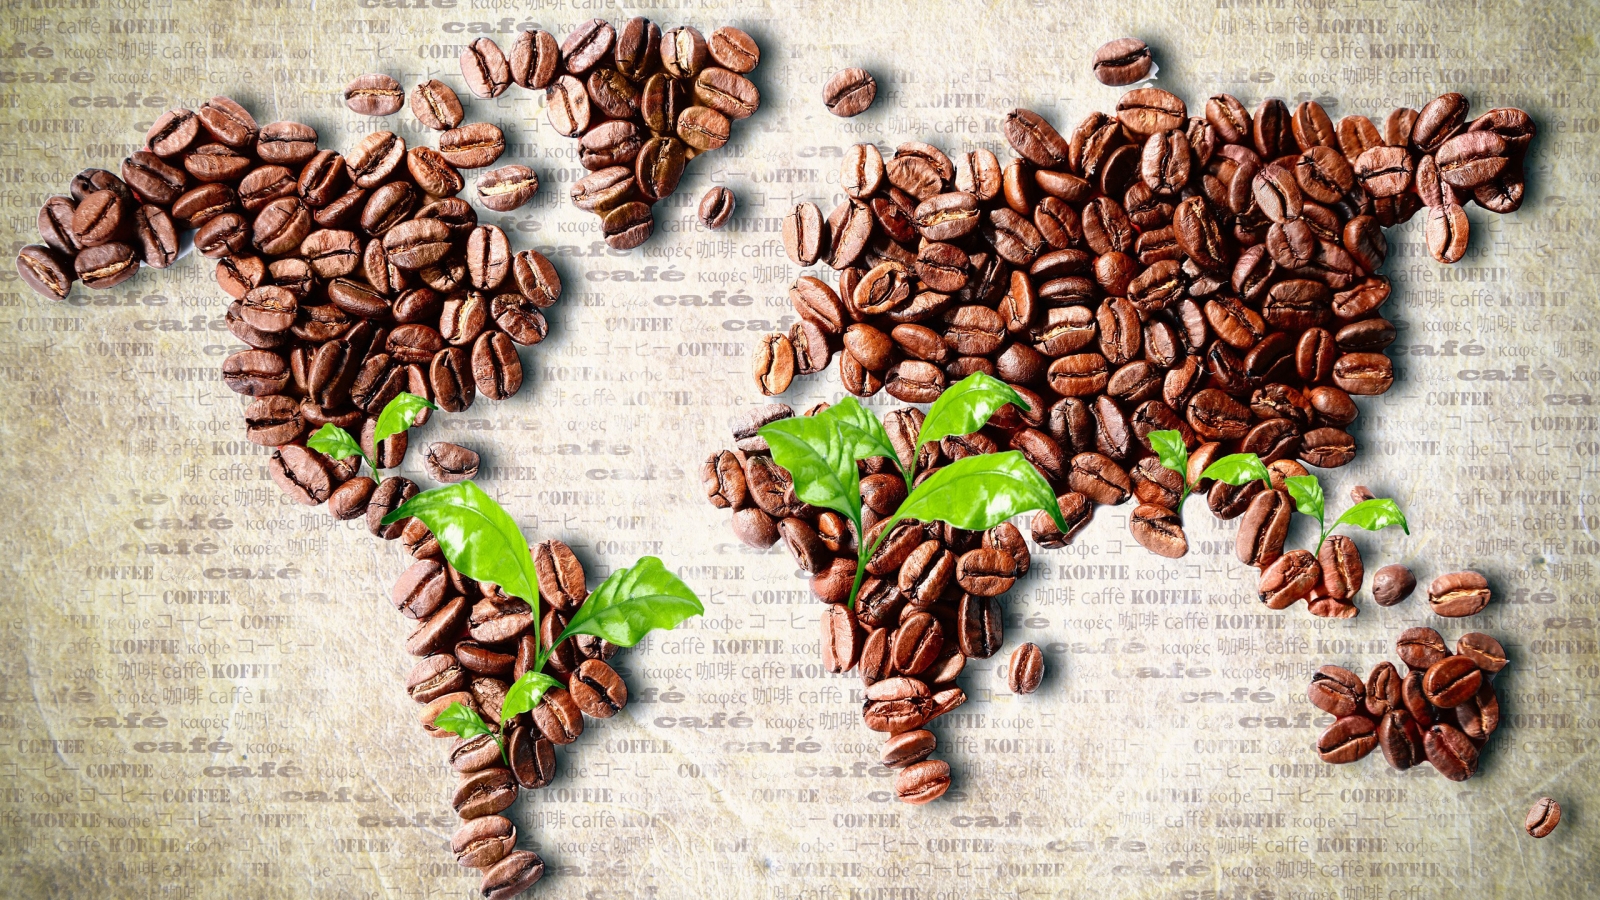 Coffee Beans World Map for 1600 x 900 HDTV resolution